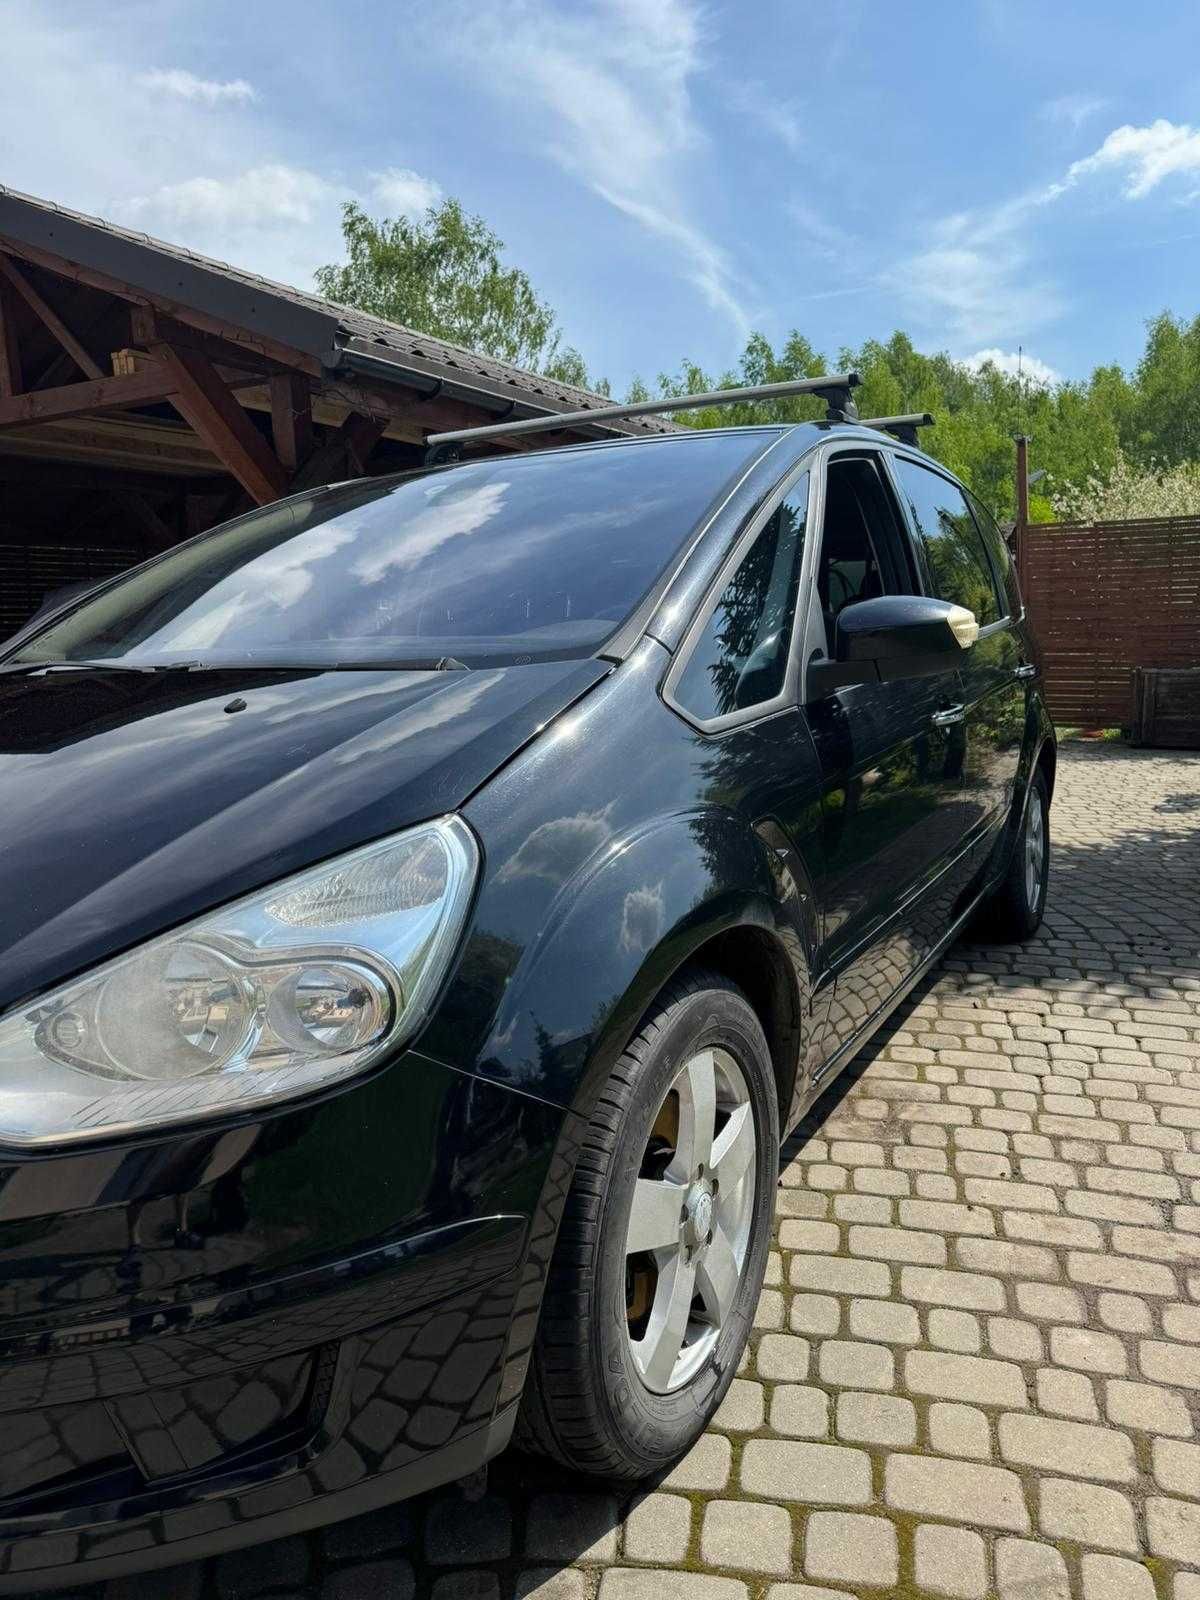 Ford S-Max 2.0 TDCi 140 KM 2009 rok7 osobowy